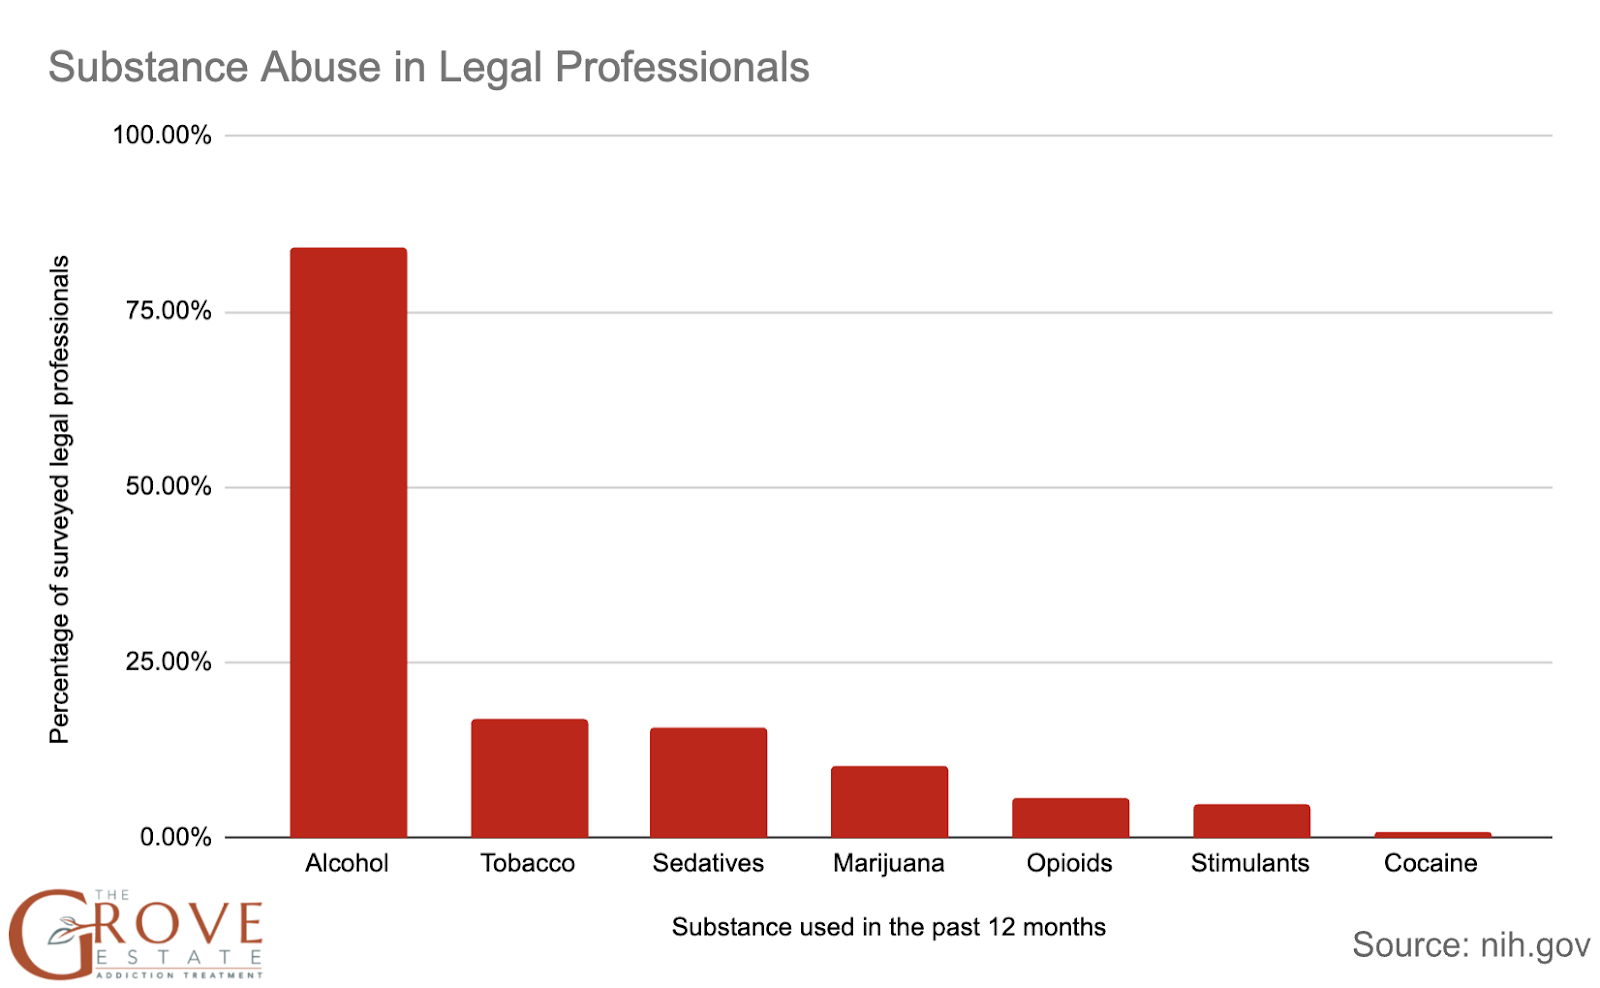 Substance abuse in legal professions